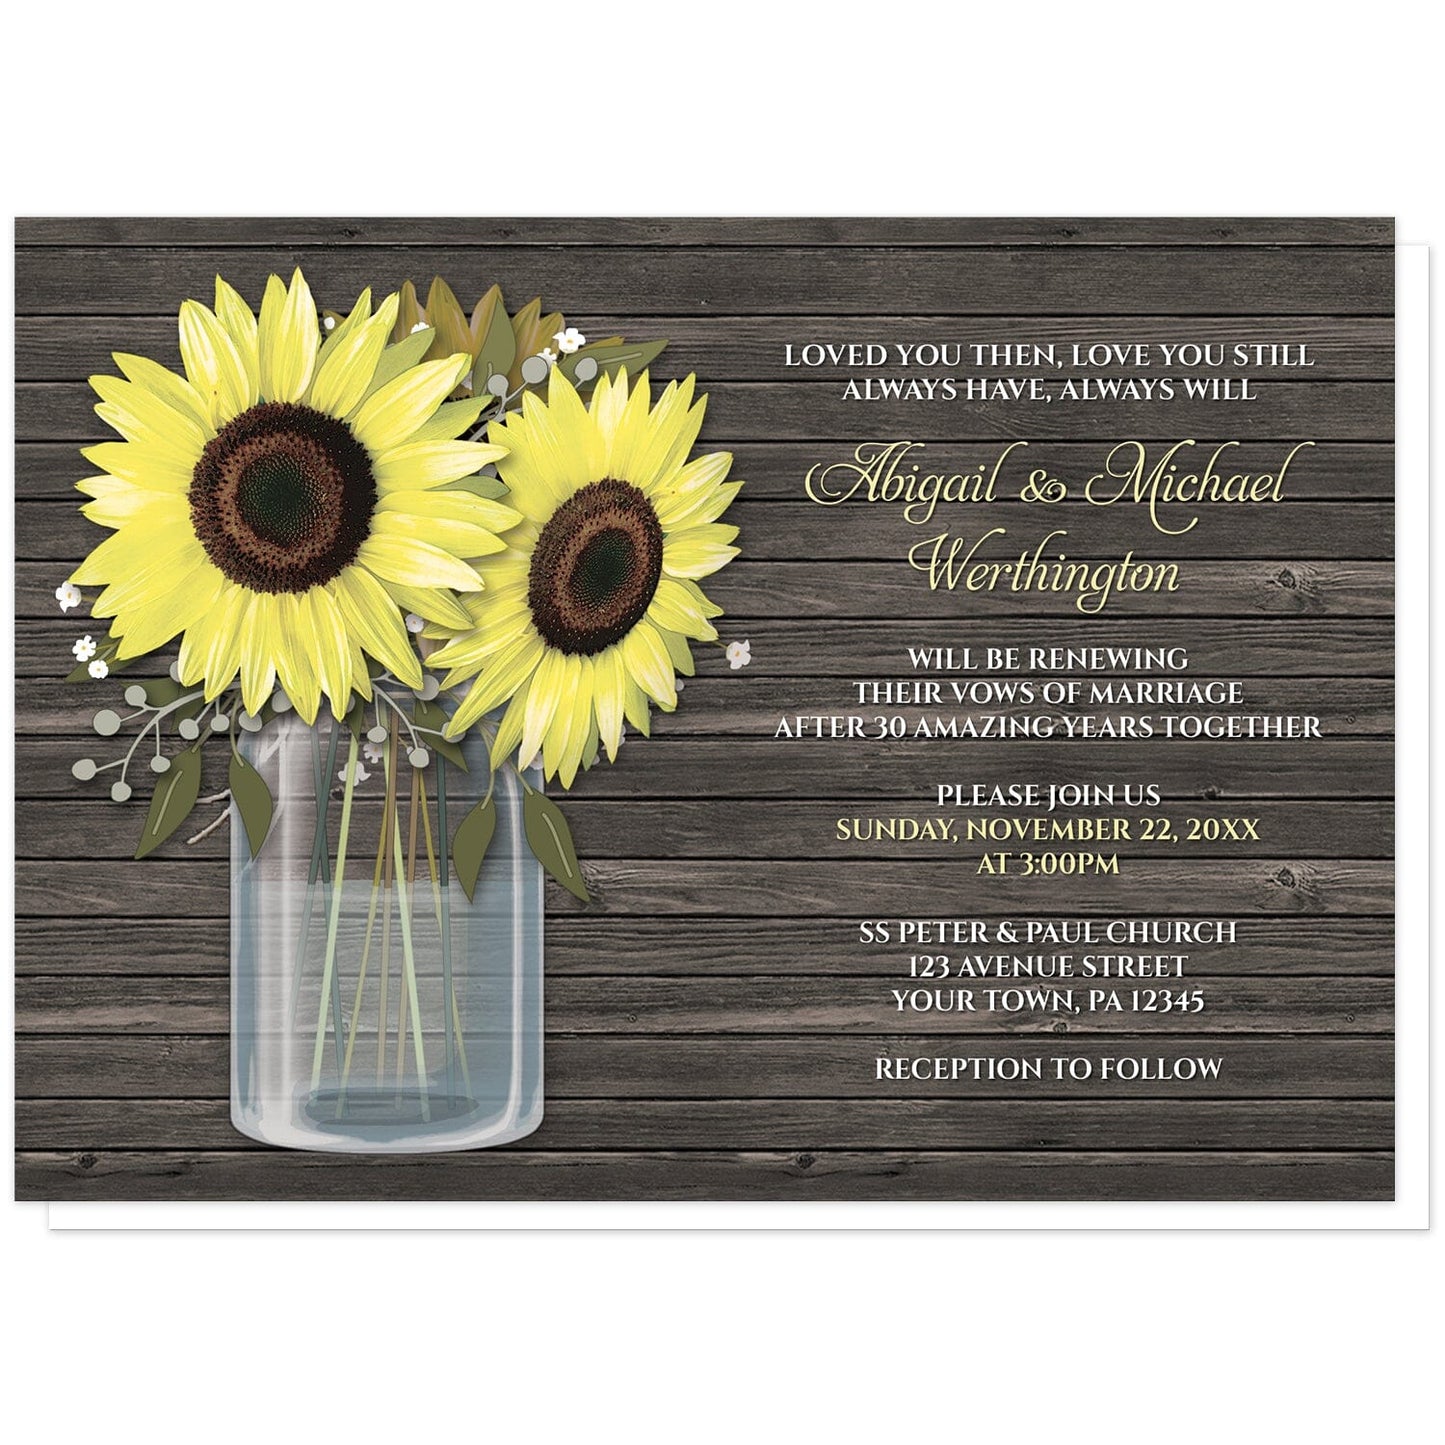 Rustic Sunflower Wood Mason Jar Vow Renewal Invitations at Artistically Invited. Southern country-inspired rustic sunflower wood mason jar vow renewal invitations with big yellow sunflowers, small accents of baby's breath, and green leaves in a glass mason jar illustration. Your personalized vow renewal details are custom printed in yellow and white to the right of the sunflowers and mason jar design over a dark brown wood background.